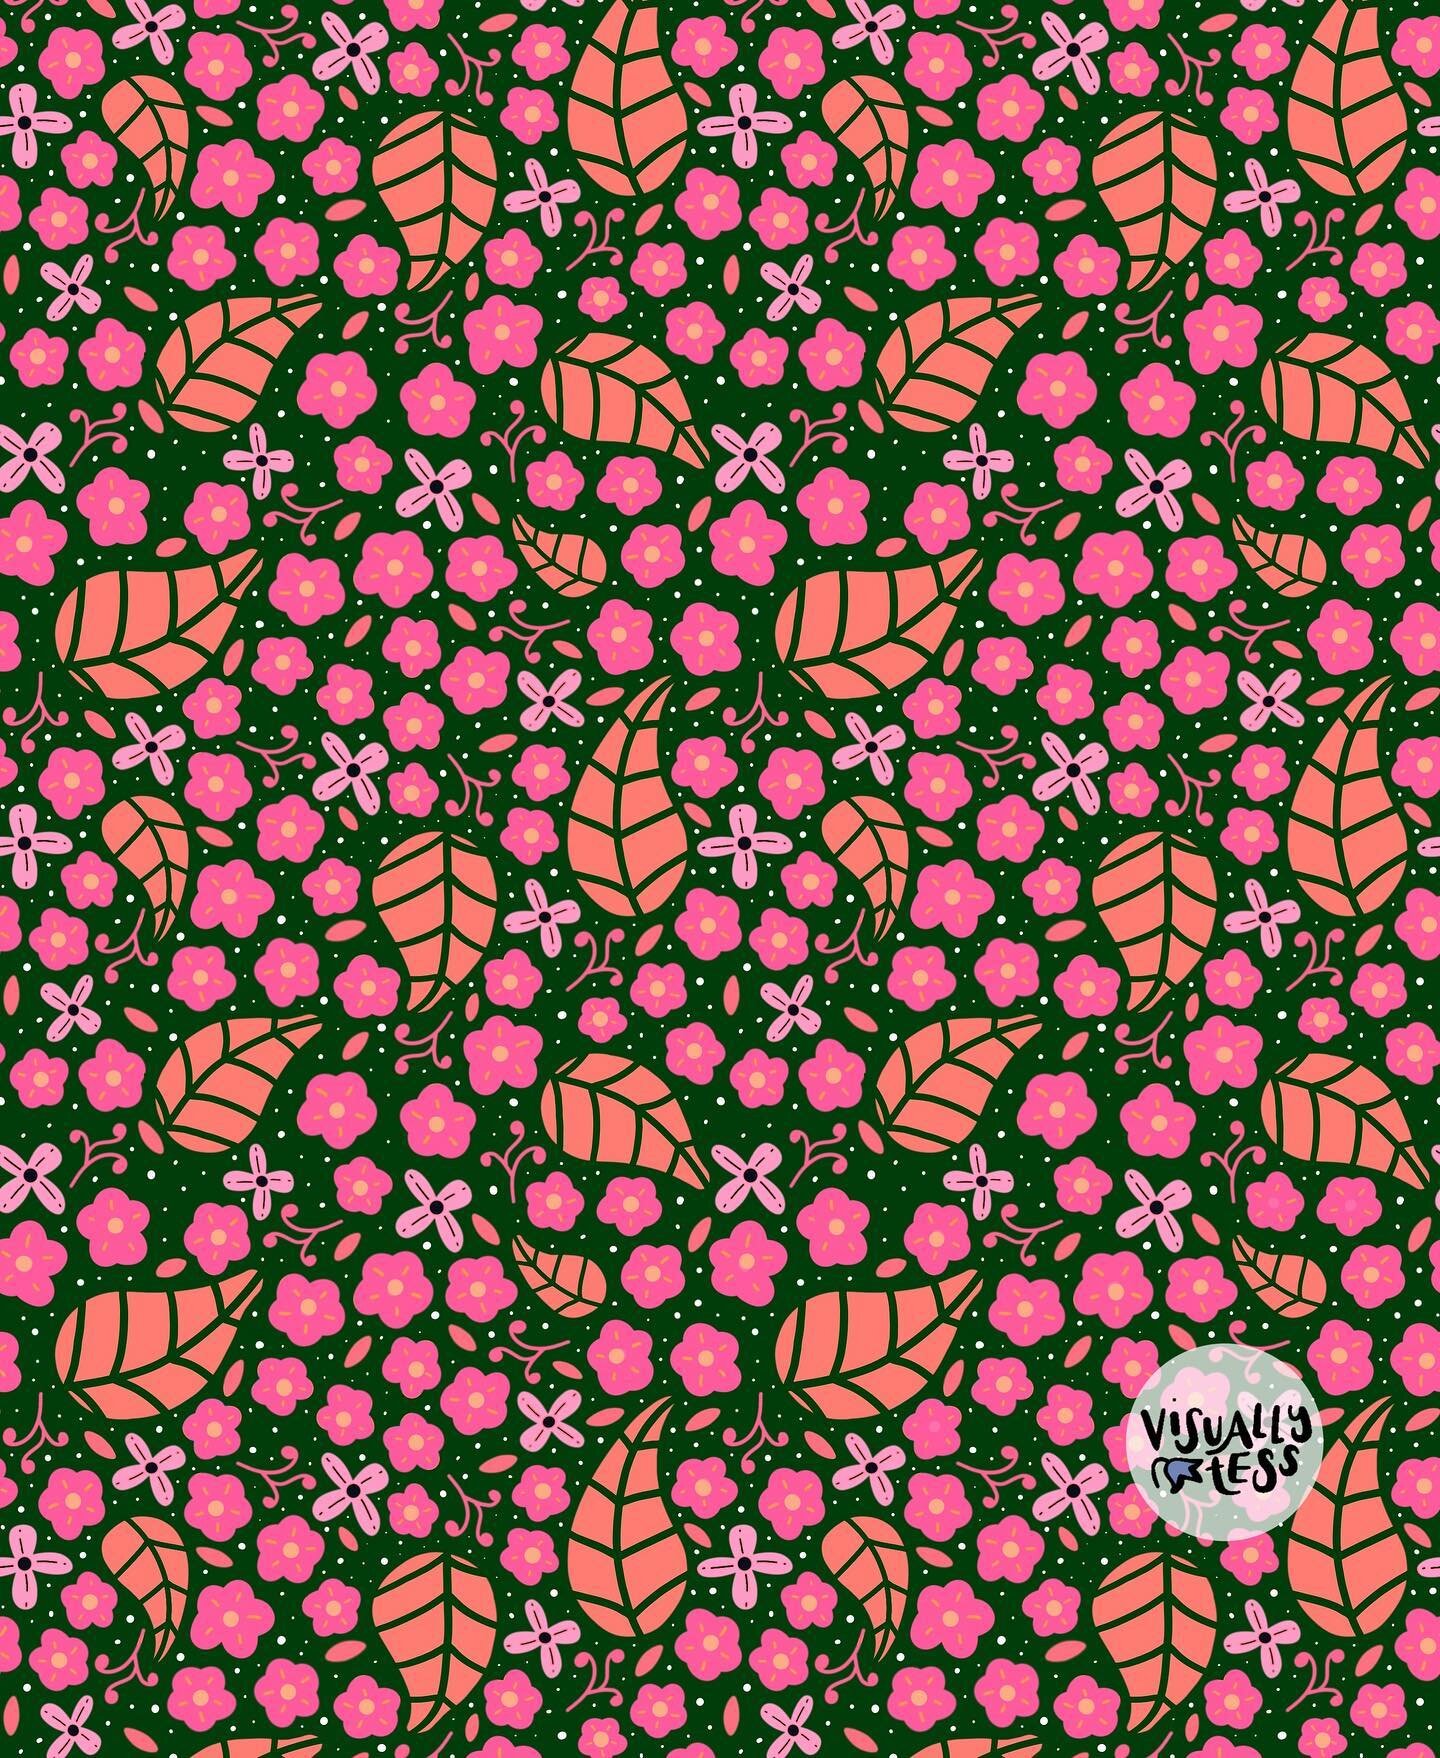 Been working on this little pattern for a few days now 🌸 super happy with how it came out 💕✨
.
#floral #flowers #pink #orange #illustrator #procreate #illustration #illustrationartists #adobe #patterndesign #print #texture #printandpattern #surface